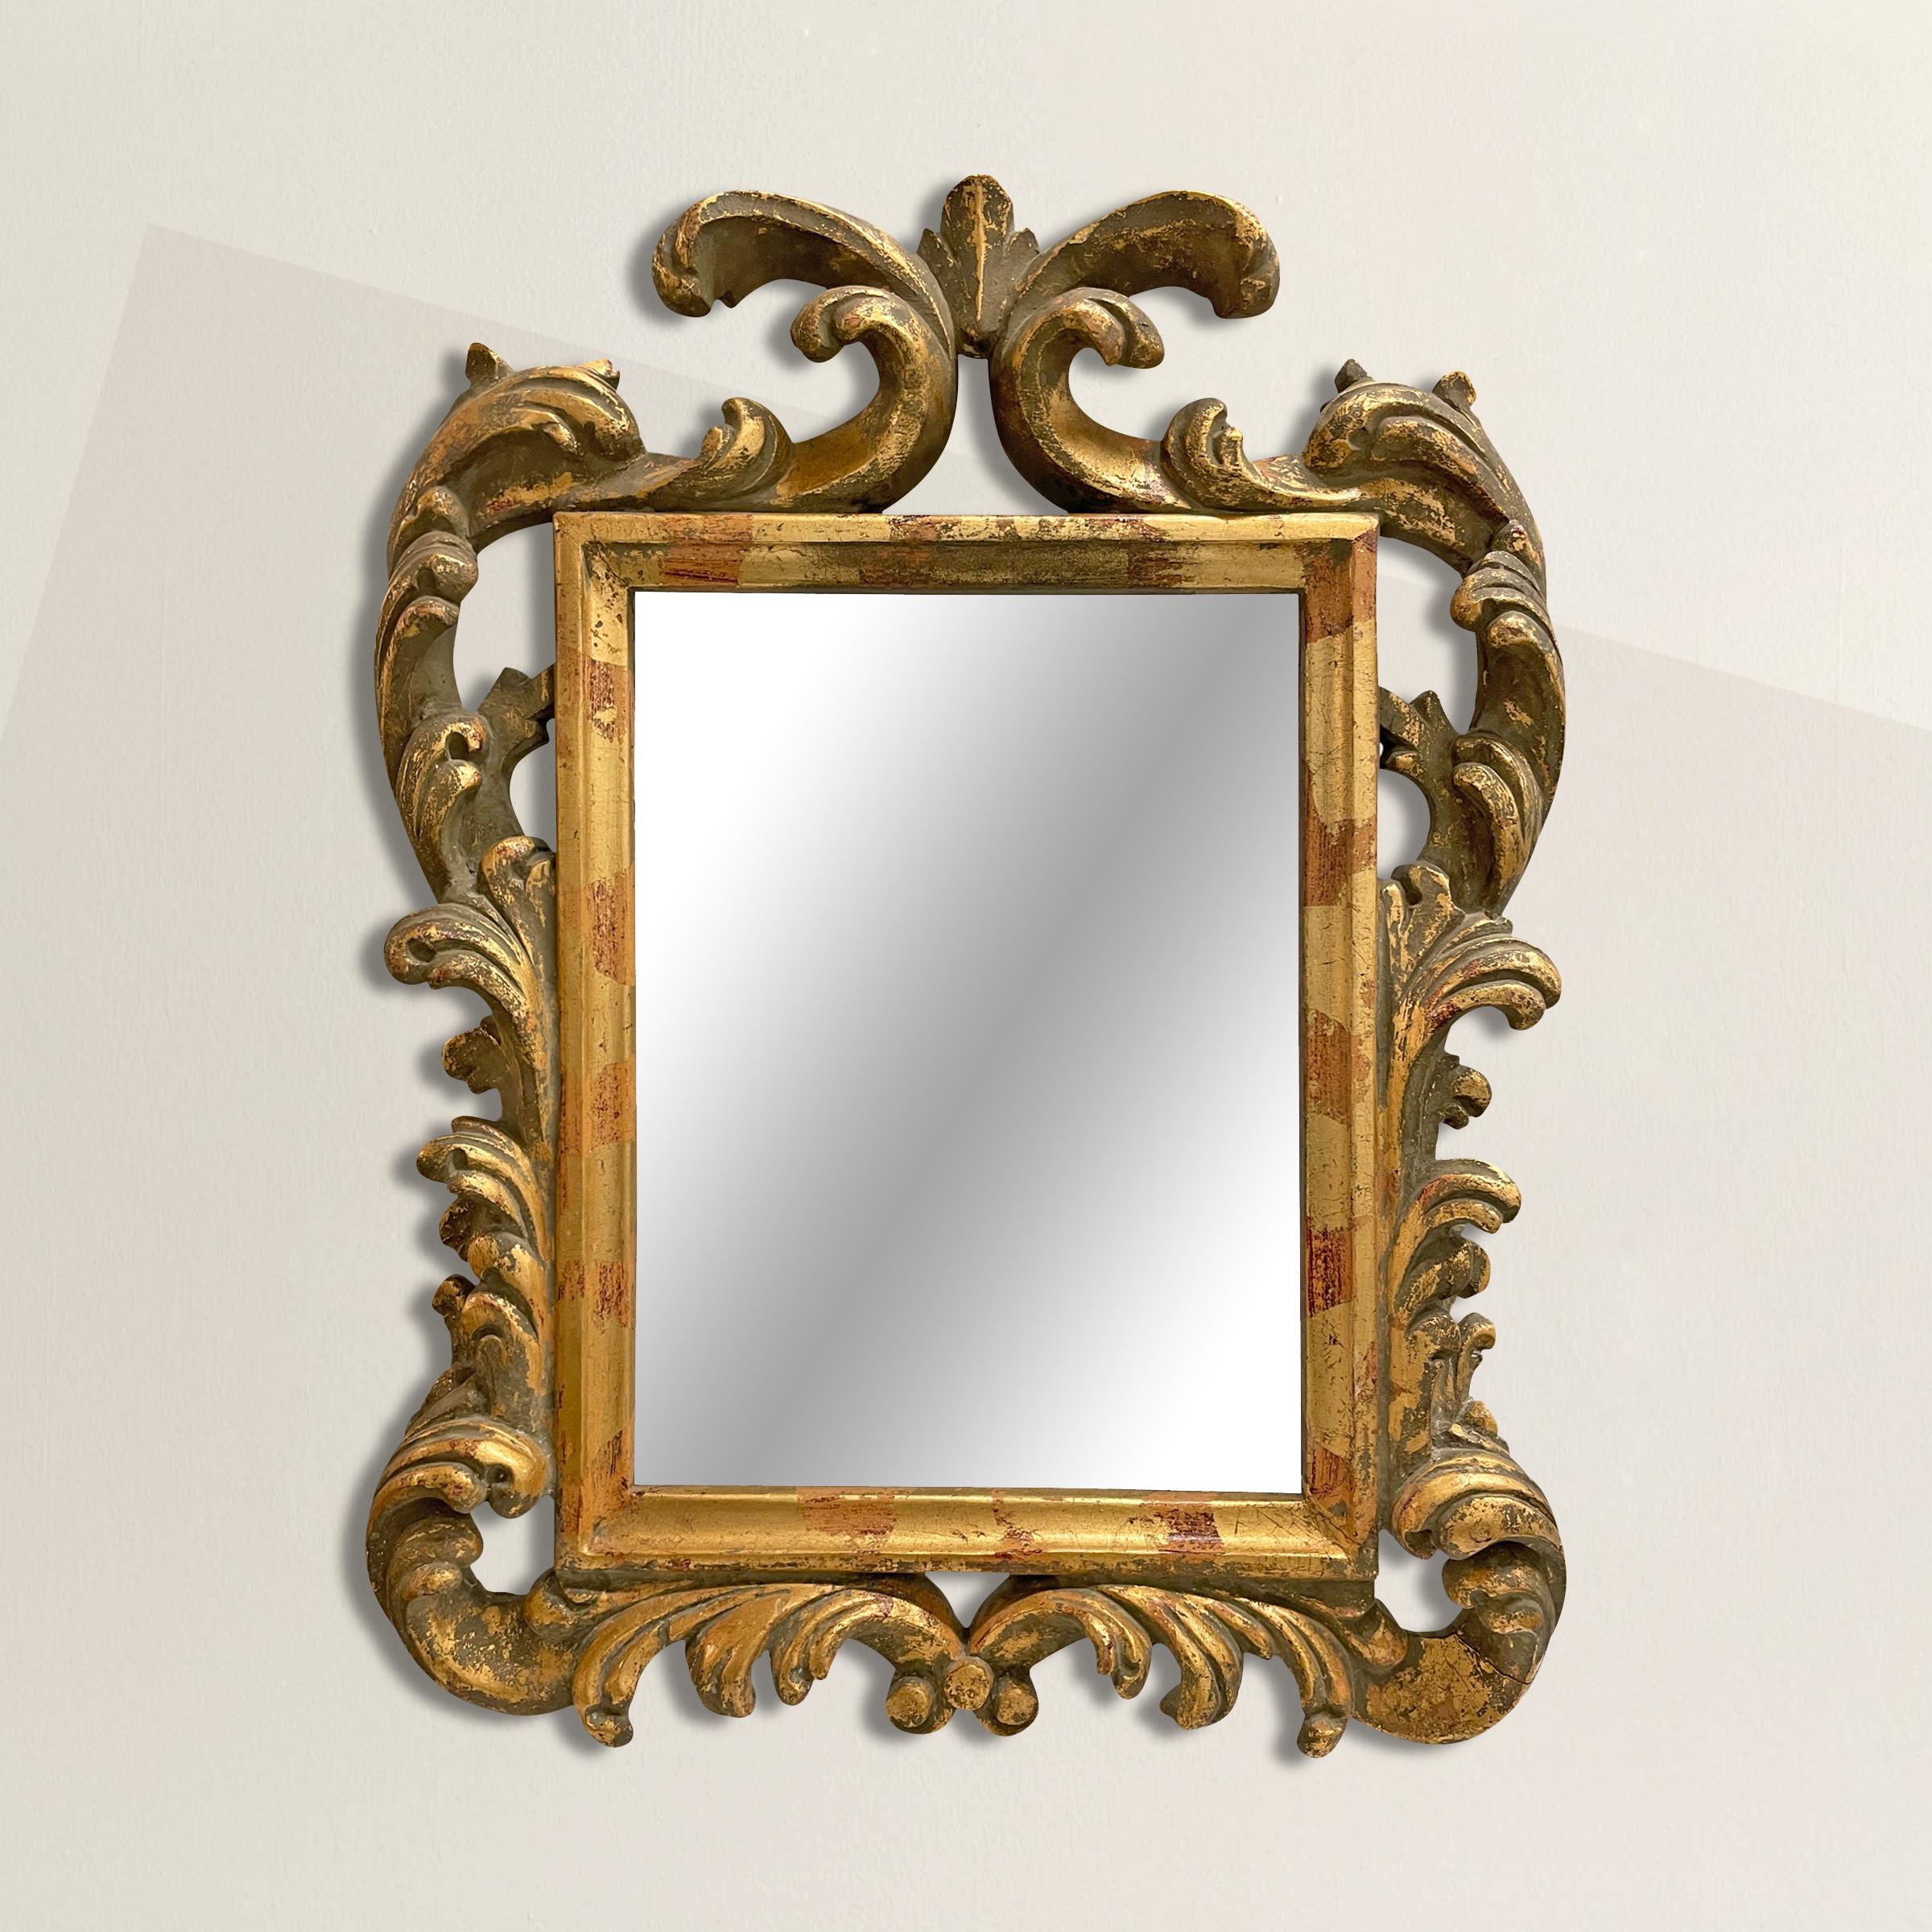 A wonderfully elaborate Baroque-style framed mirror with a gilt wood frame with applied painted and gilt composition scrolling foliate forms. Perfect for your powder room, entryway, or any other spot you need a little extra sparkle!